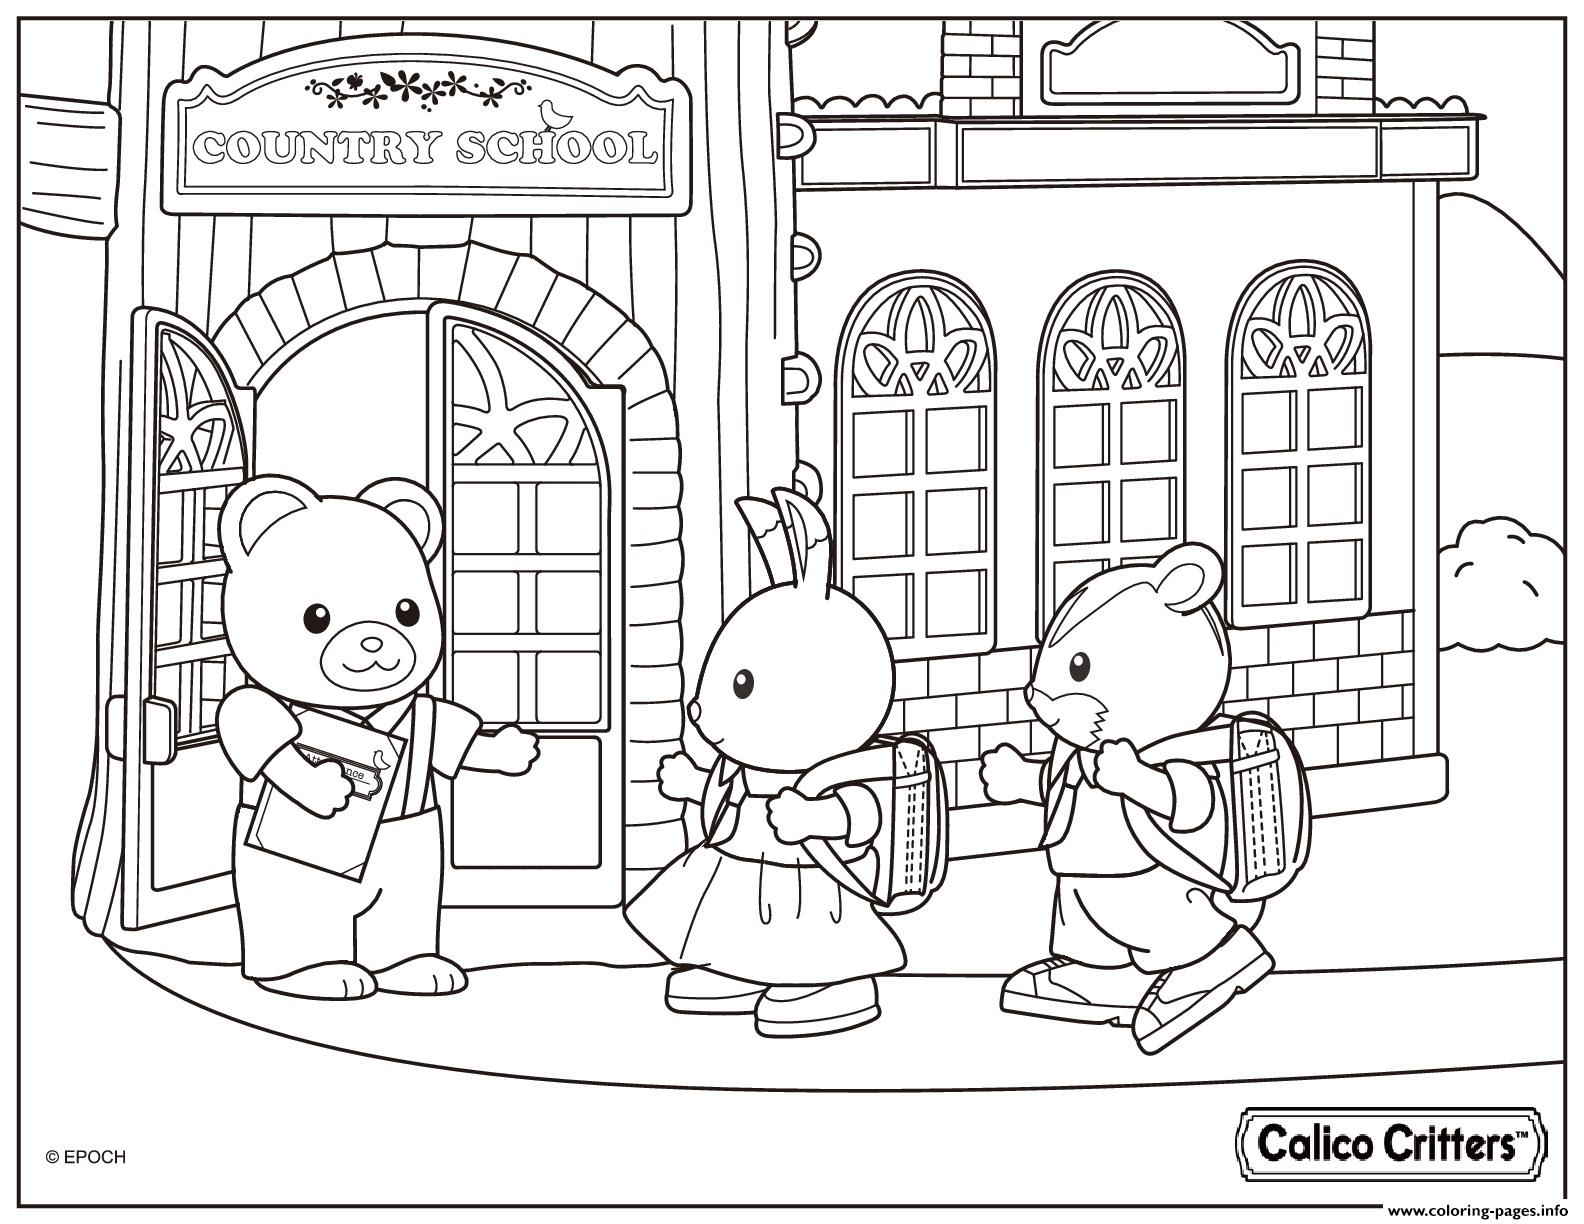 Calico Critters Country School coloring pages